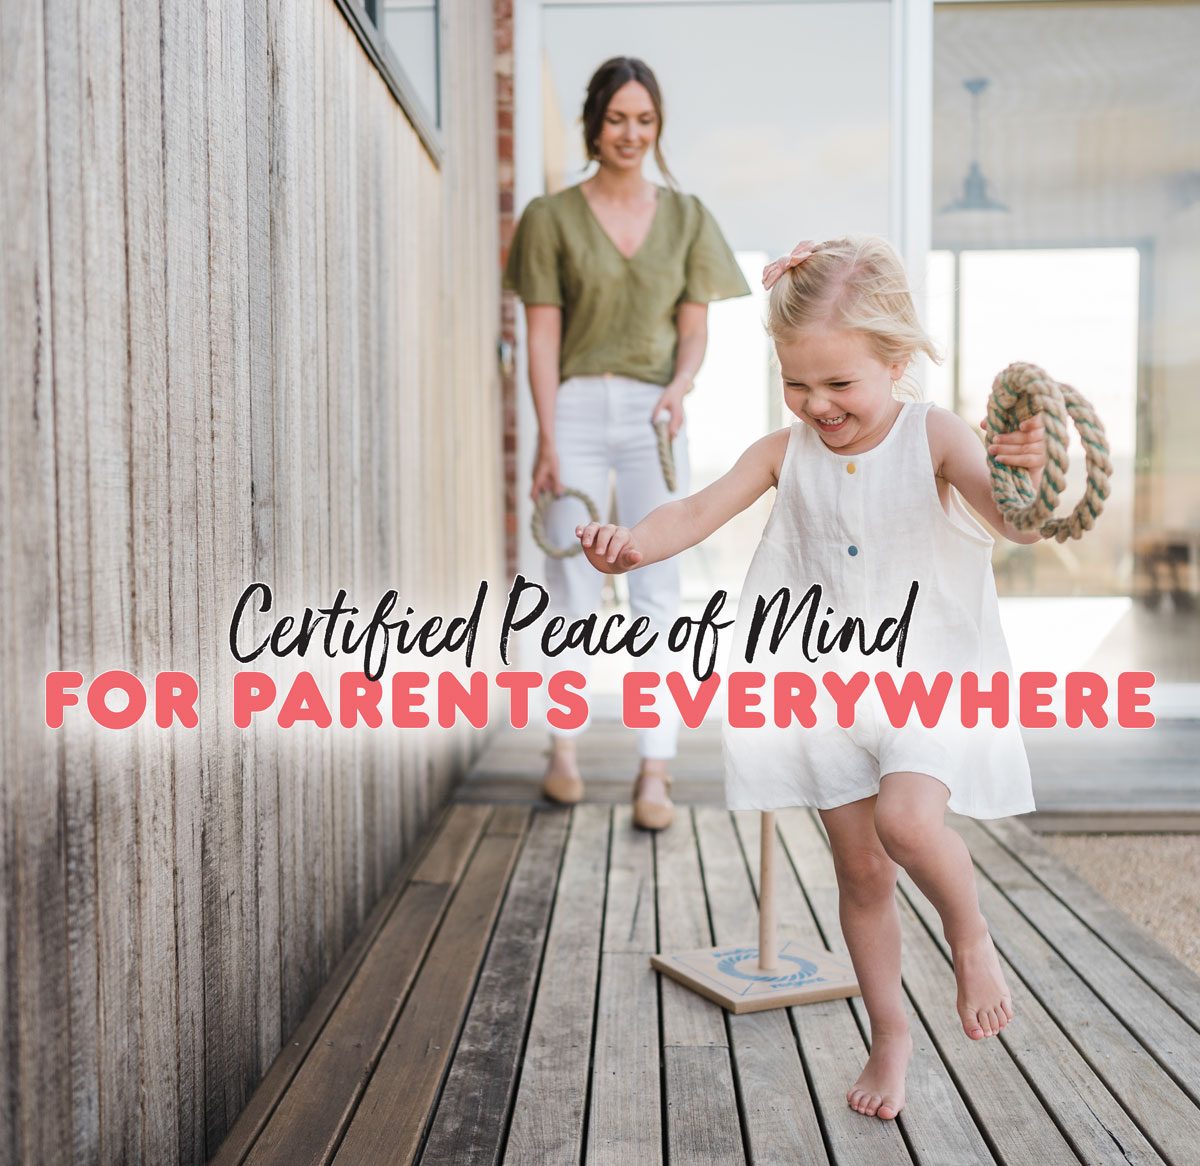 Certified peace of mind for parents everywhere